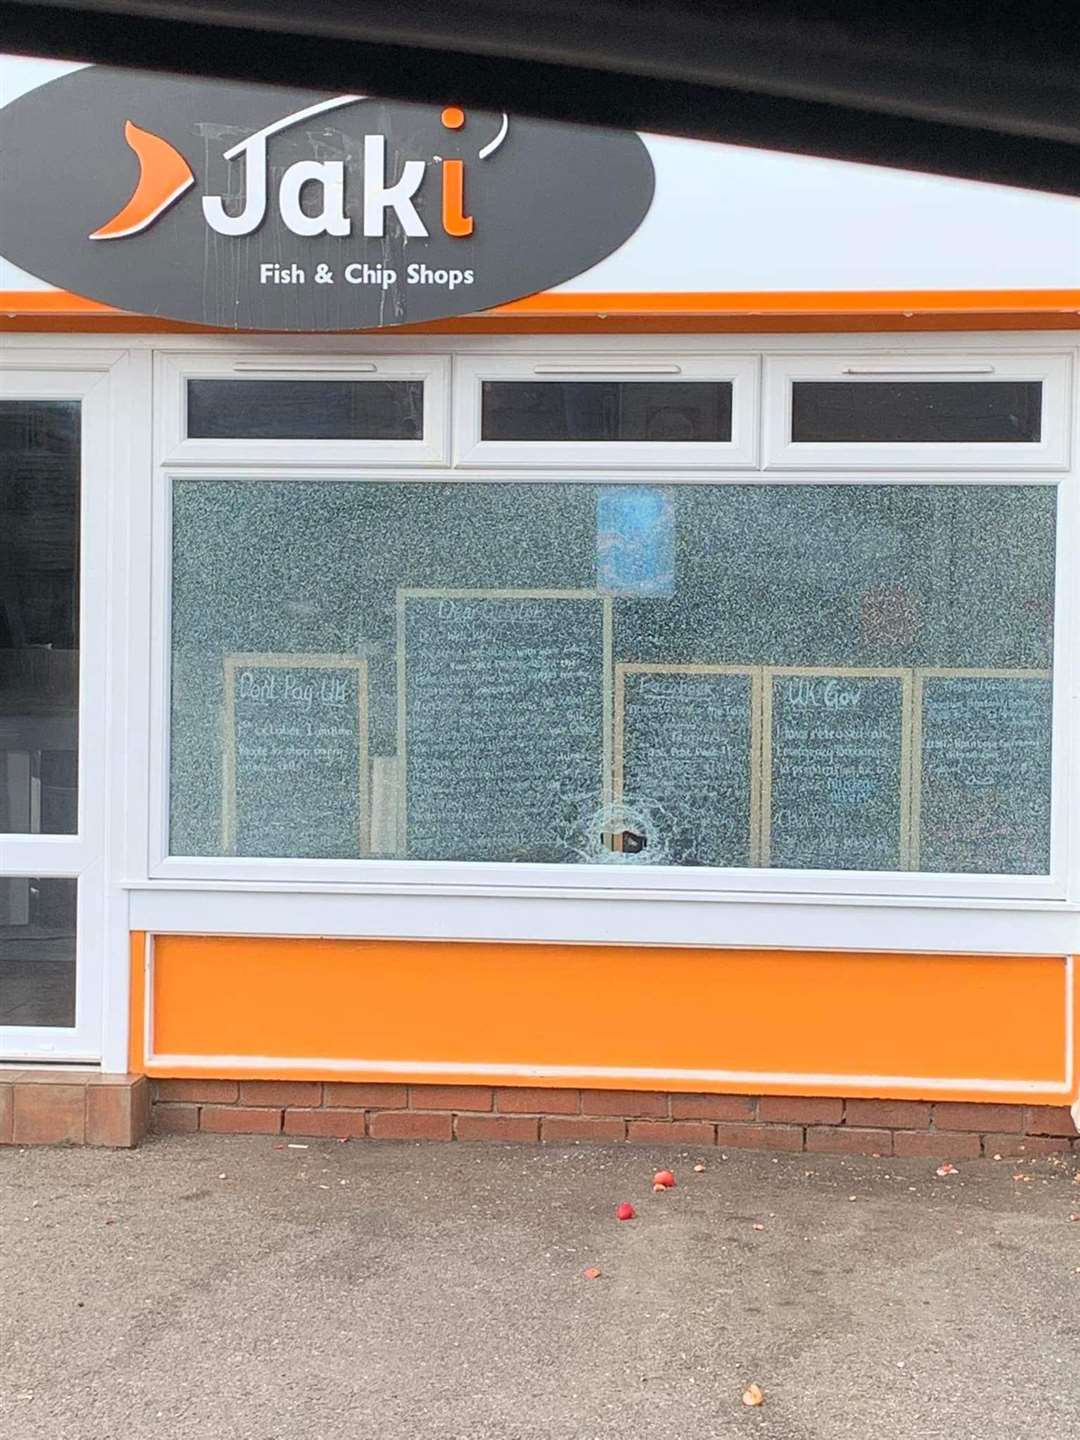 The window of the fish and chip shop was smashed.